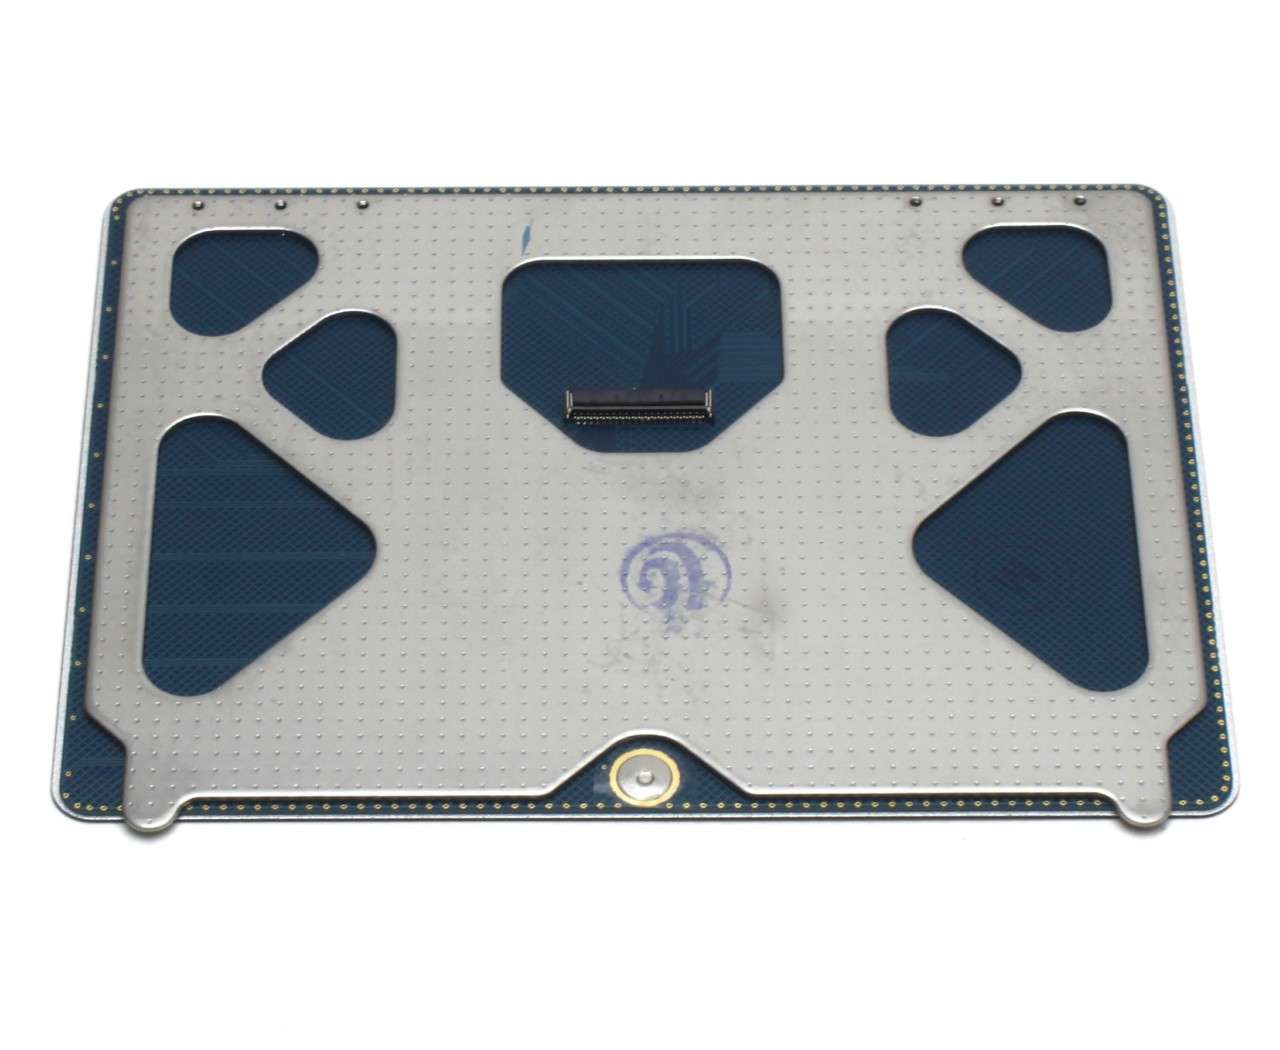 Touchpad Apple Macbook Pro Unibody 13 A1286 Mid 2012 Trackpad